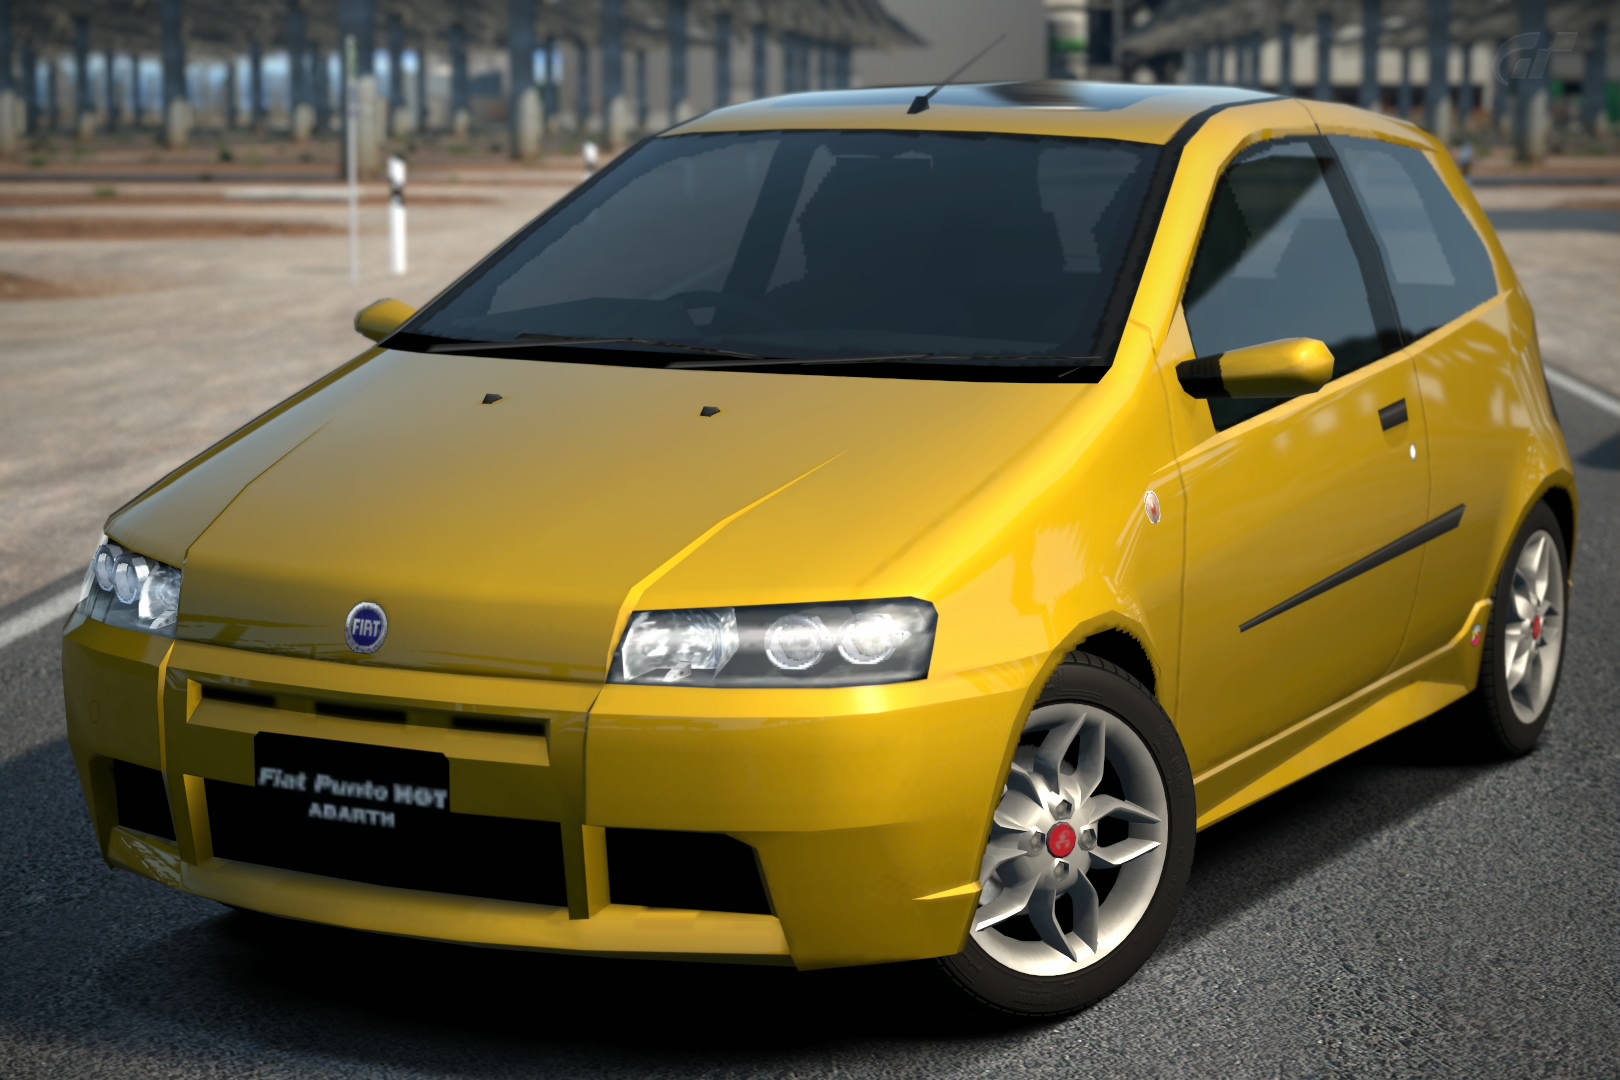 https://static.wikia.nocookie.net/gran-turismo/images/a/ac/Fiat_Punto_HGT_Abarth_%2700.jpg/revision/latest?cb=20181005195748